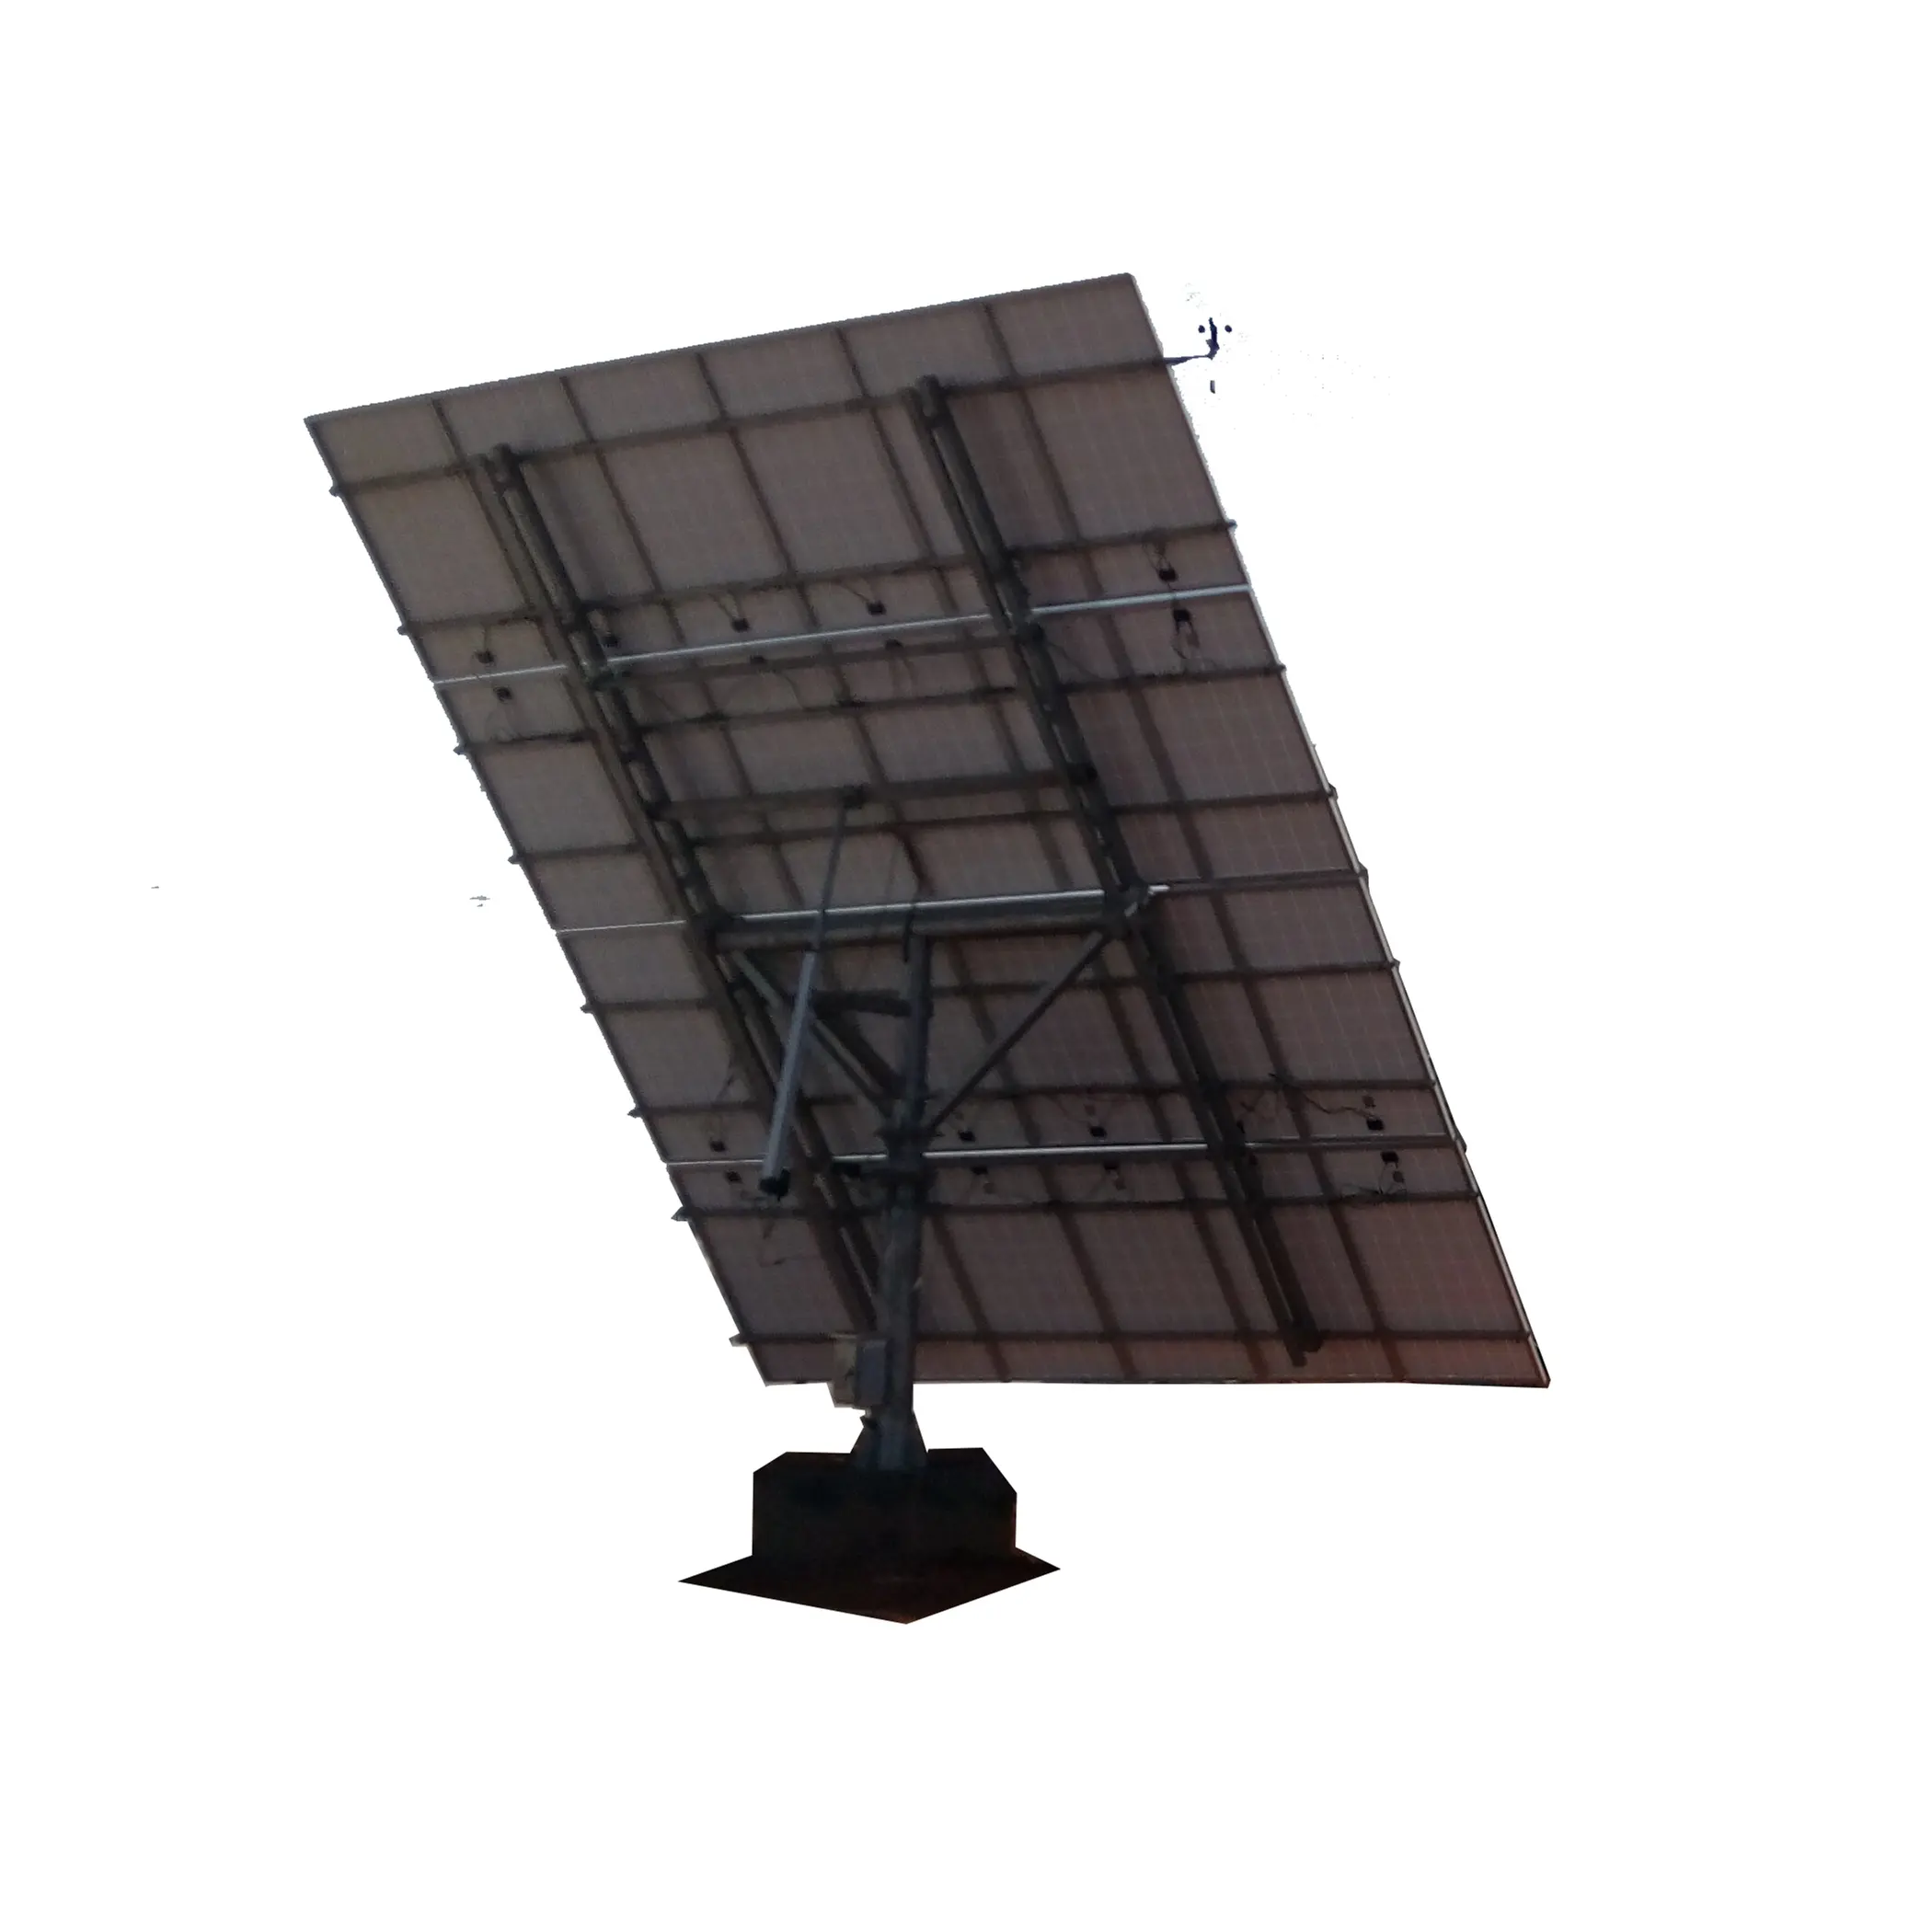 7,5 kw Power generation dual 2 achse tracker solar tracking system sonne photovoltaik solar panel pv system